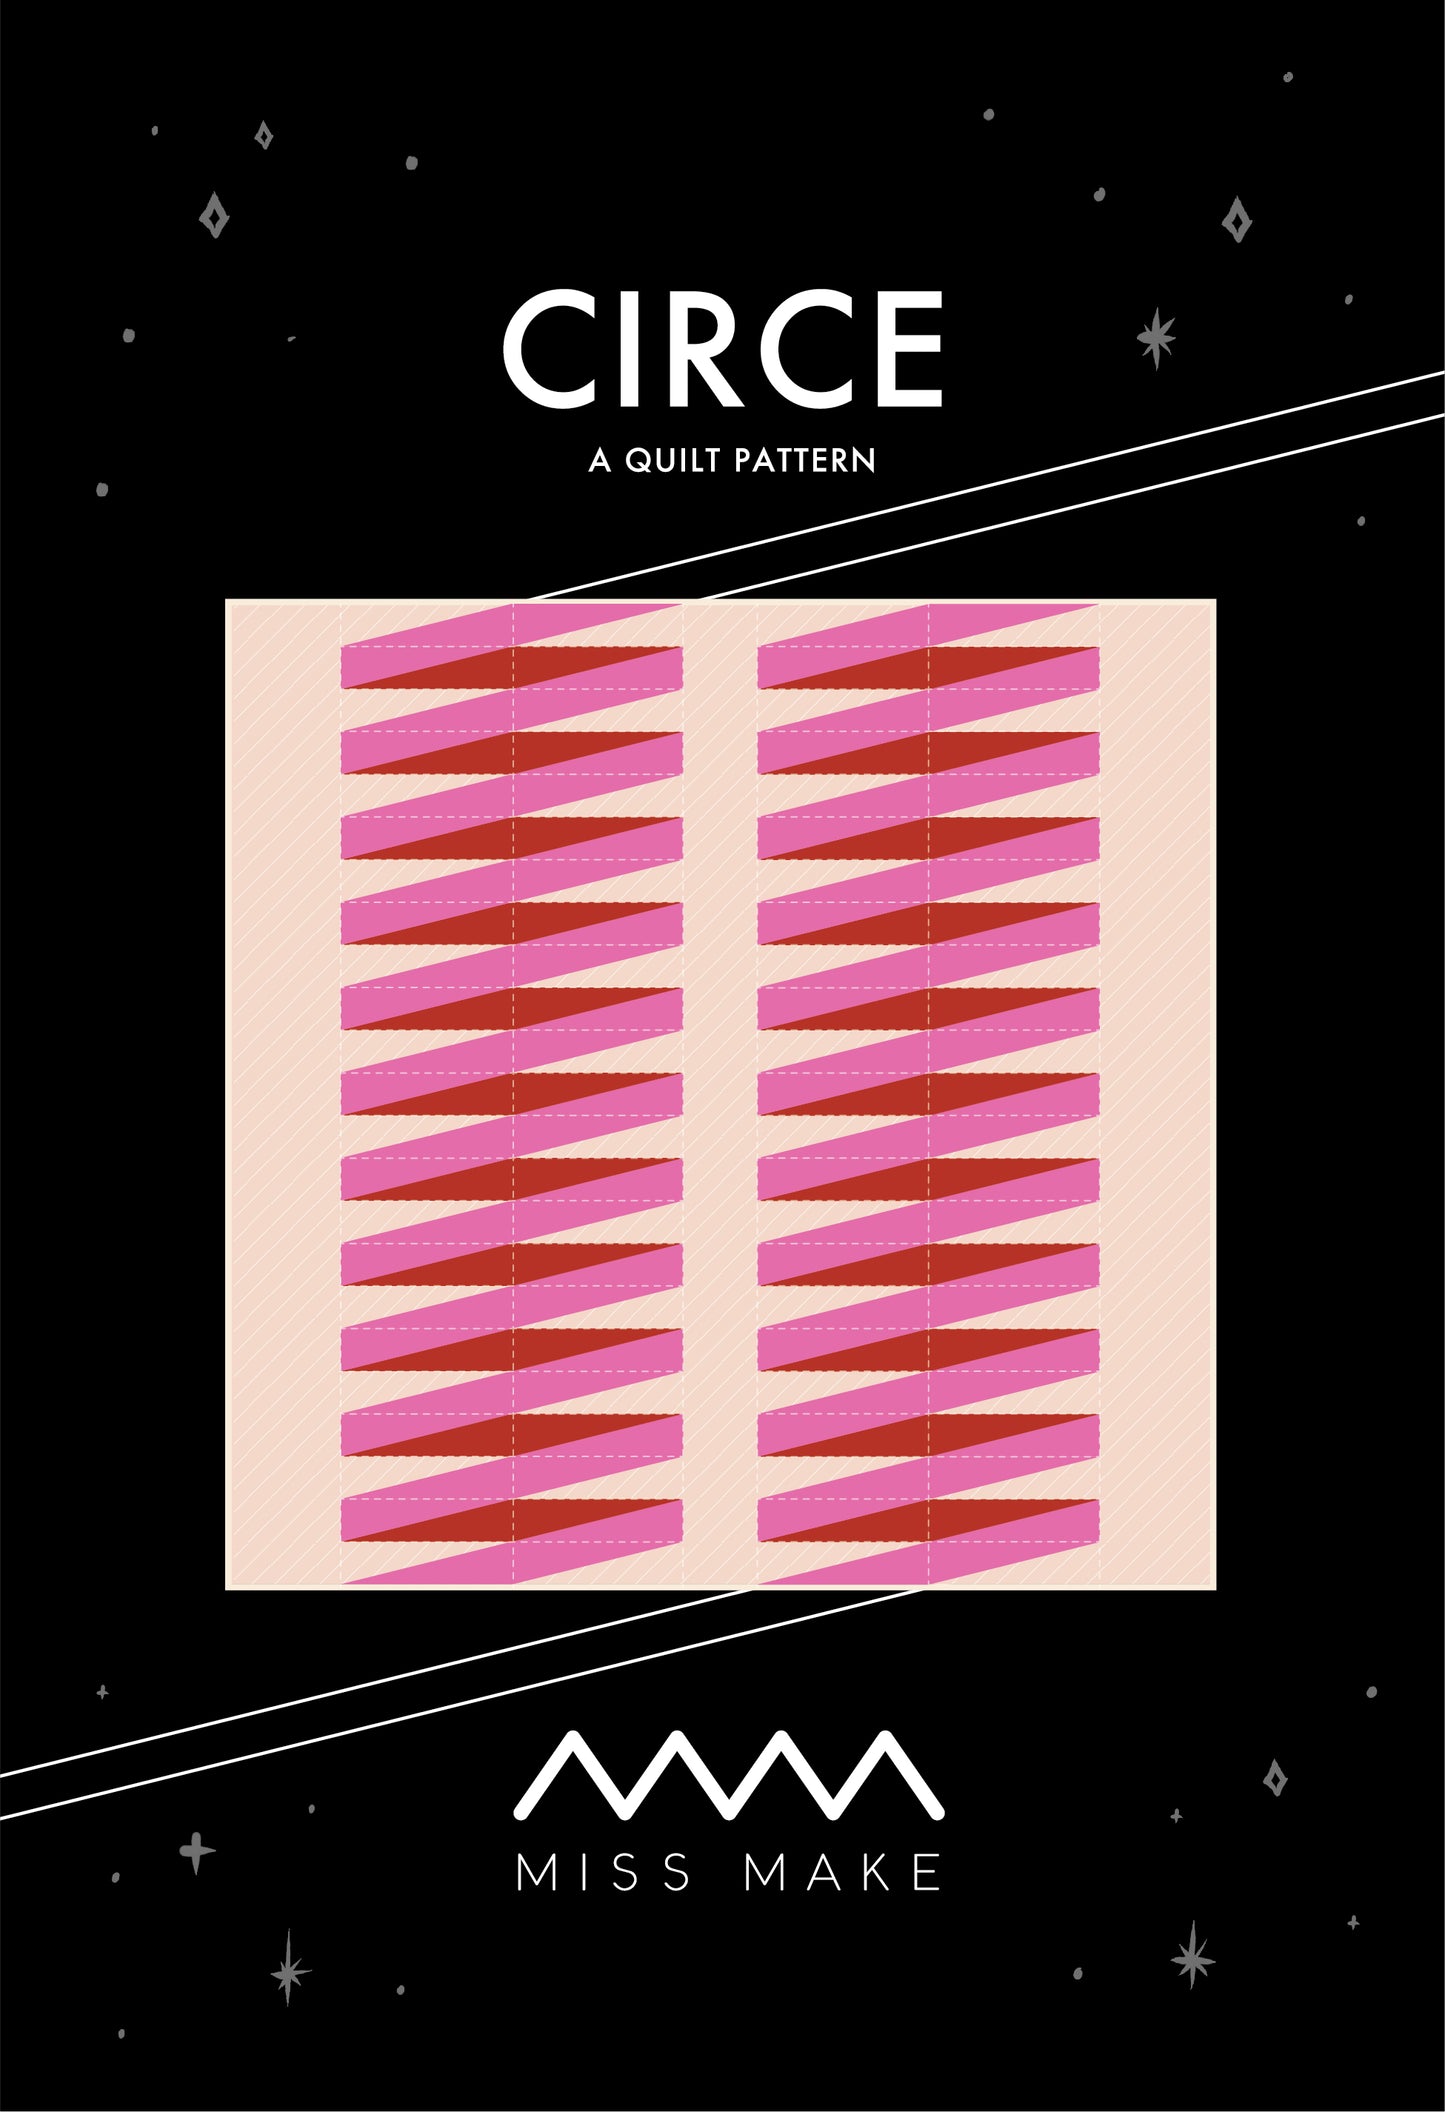 Circe Quilt Pattern by Miss Make